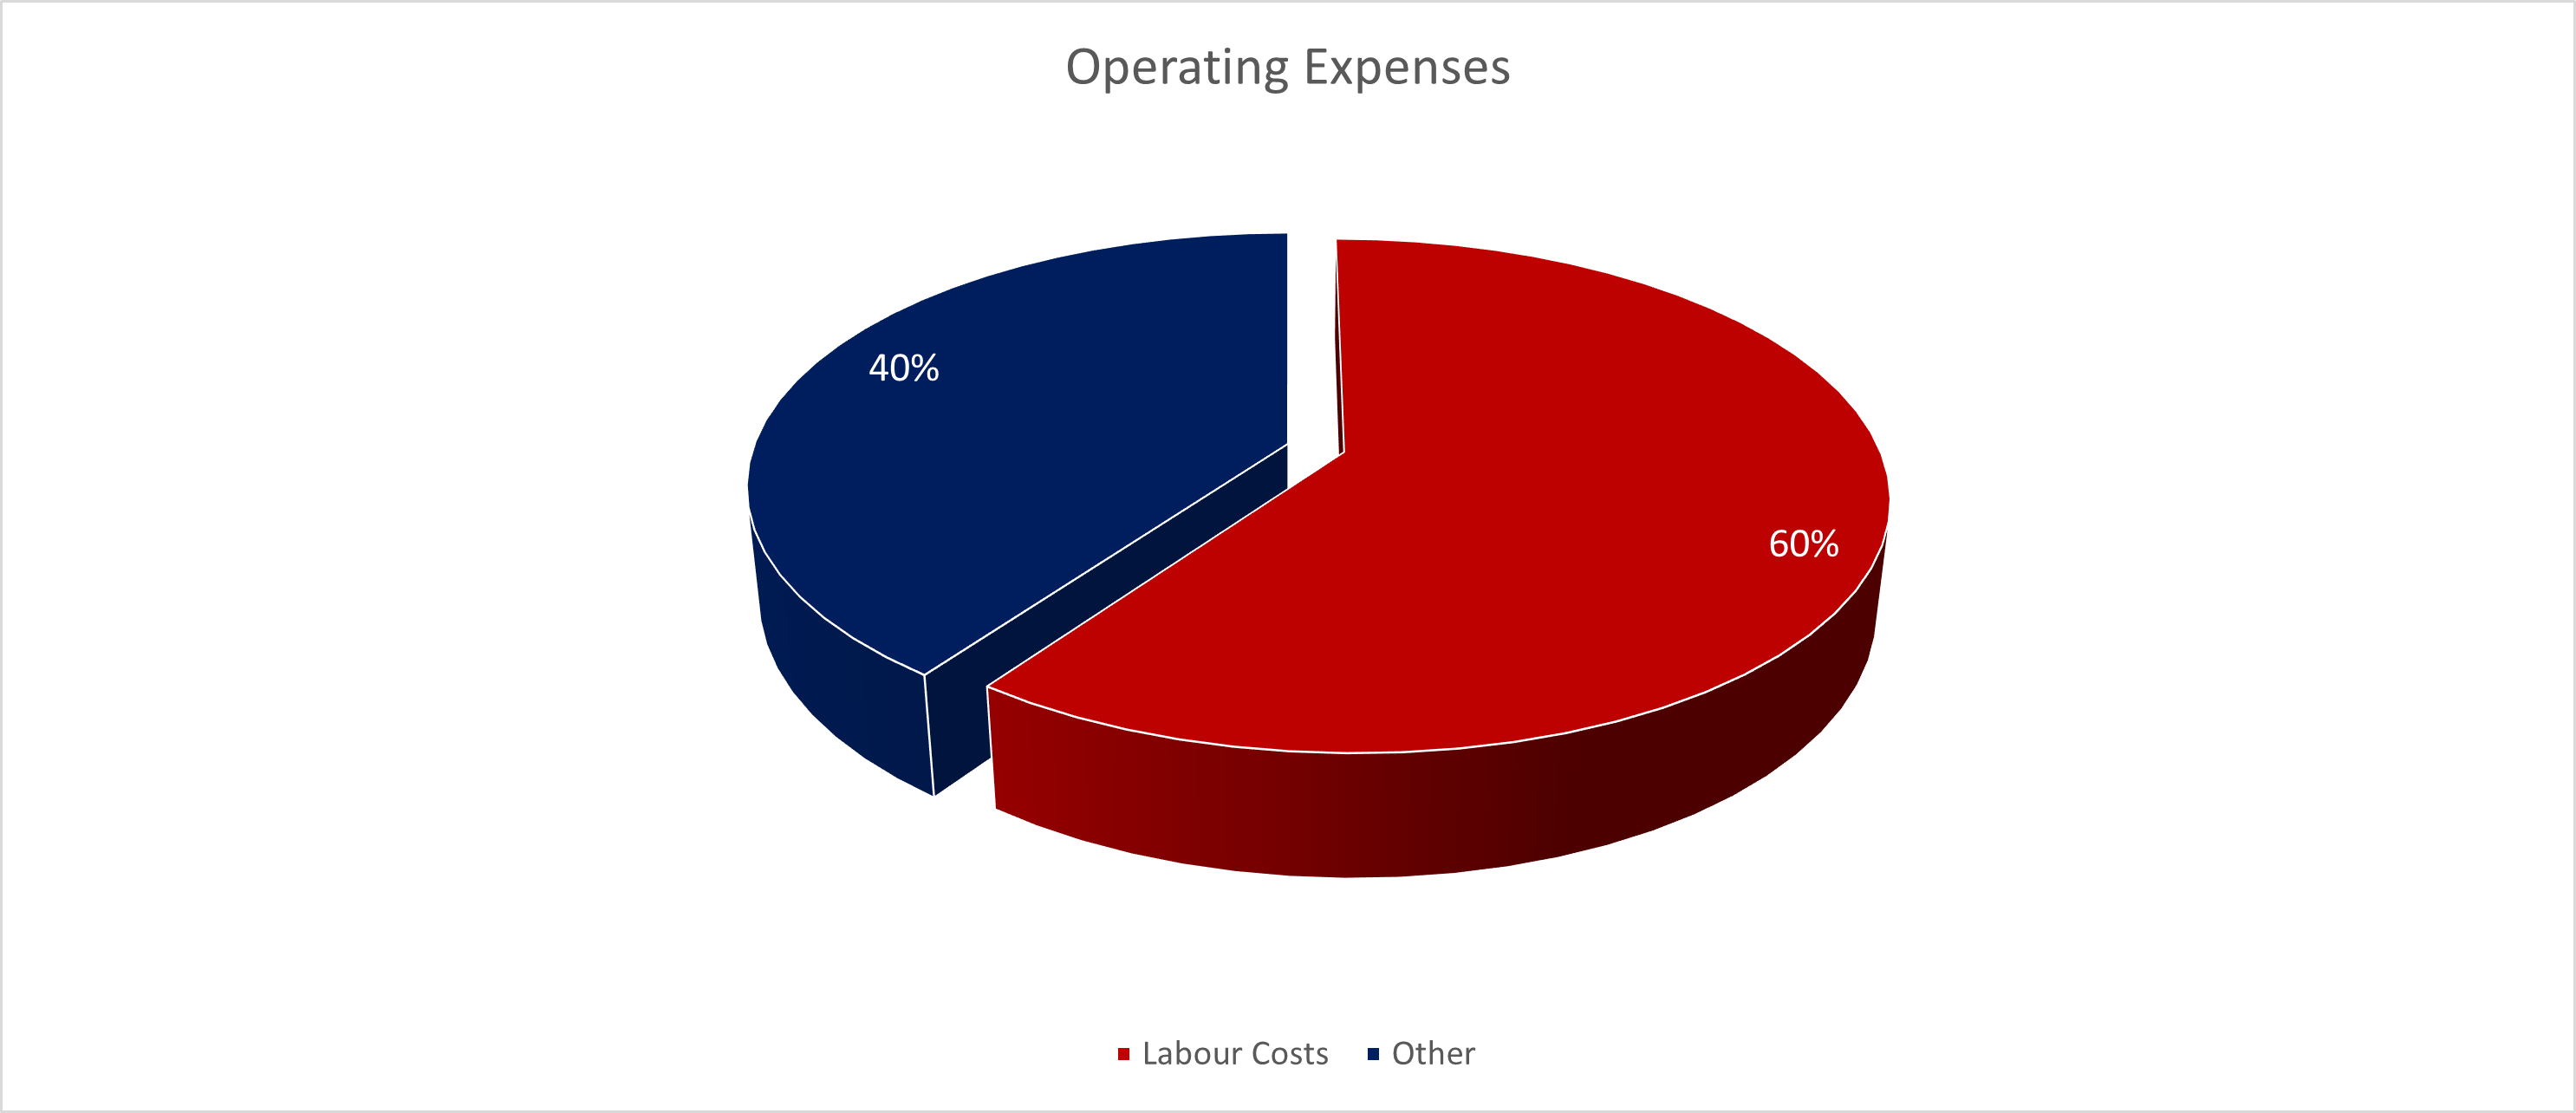 Airport operating expenses